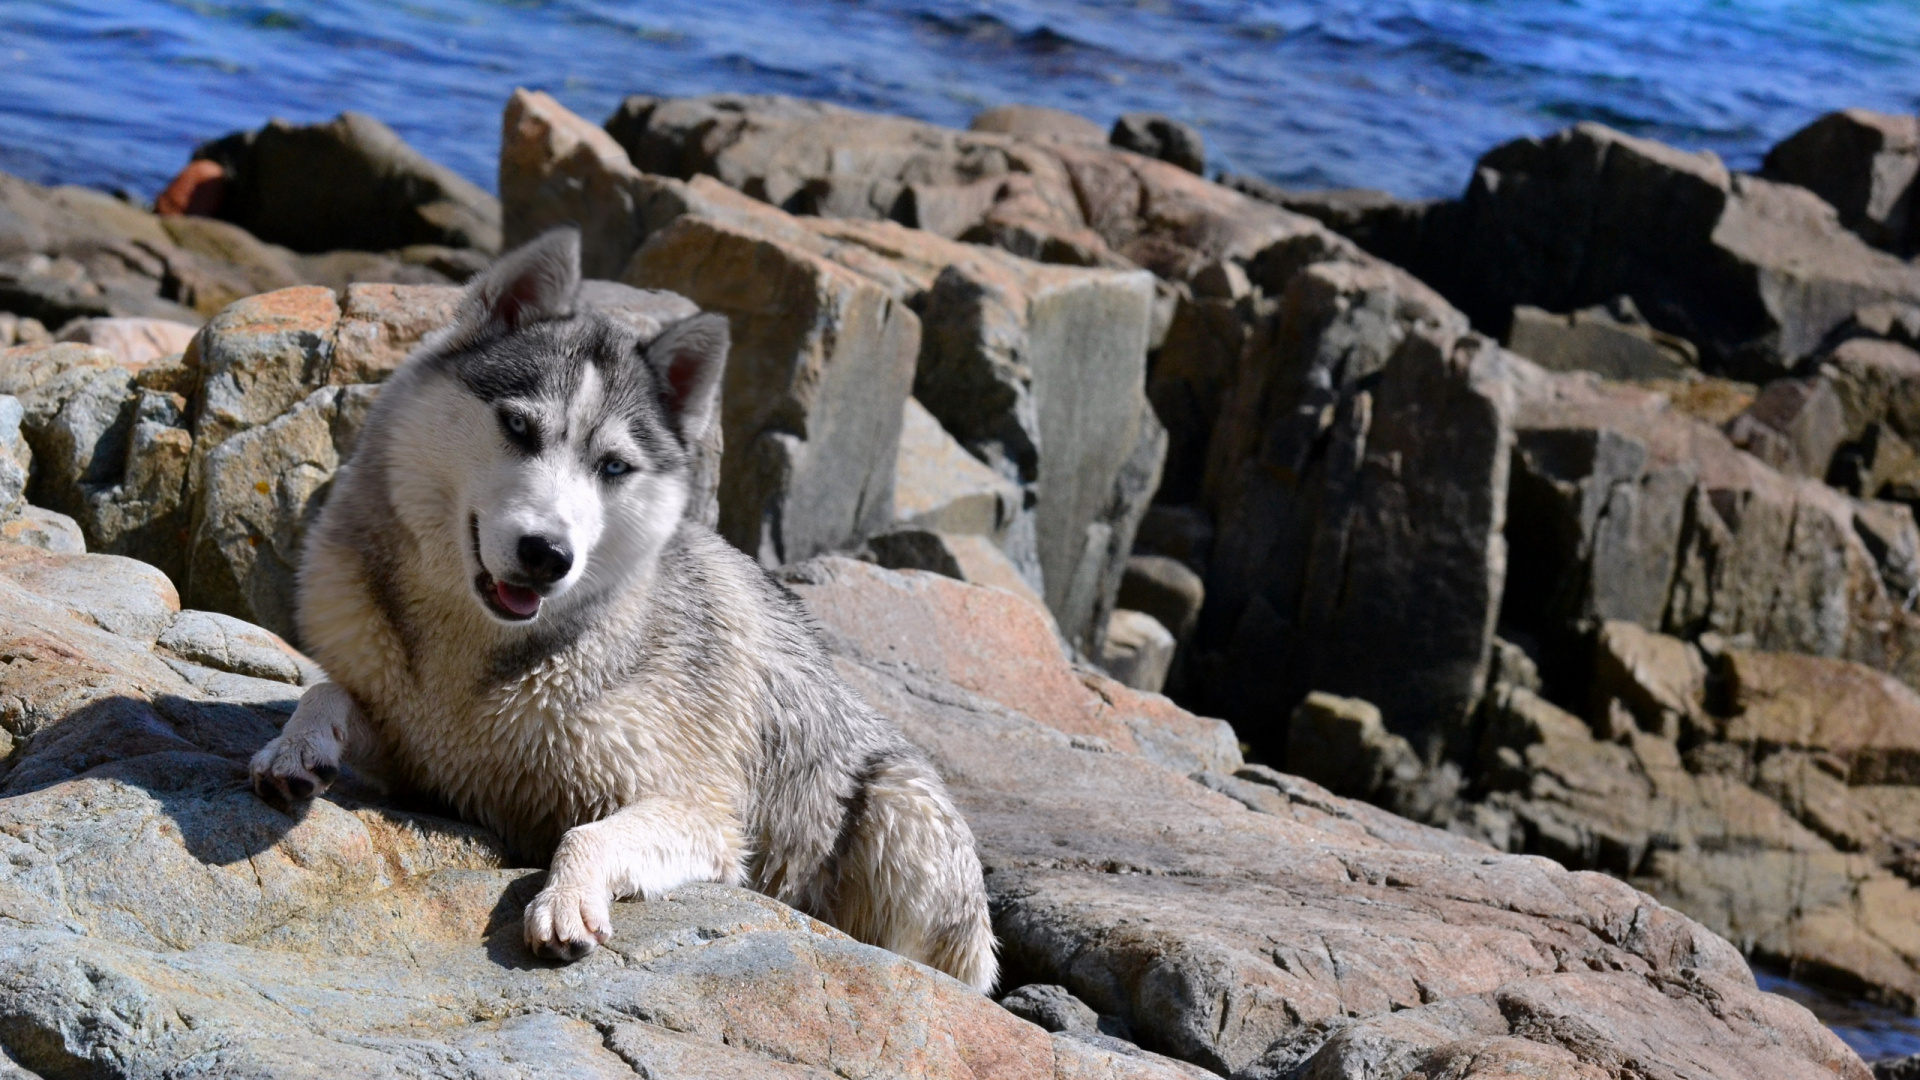 White Siberian Husky on Rock Formation Near Body of Water During Daytime. Wallpaper in 1920x1080 Resolution